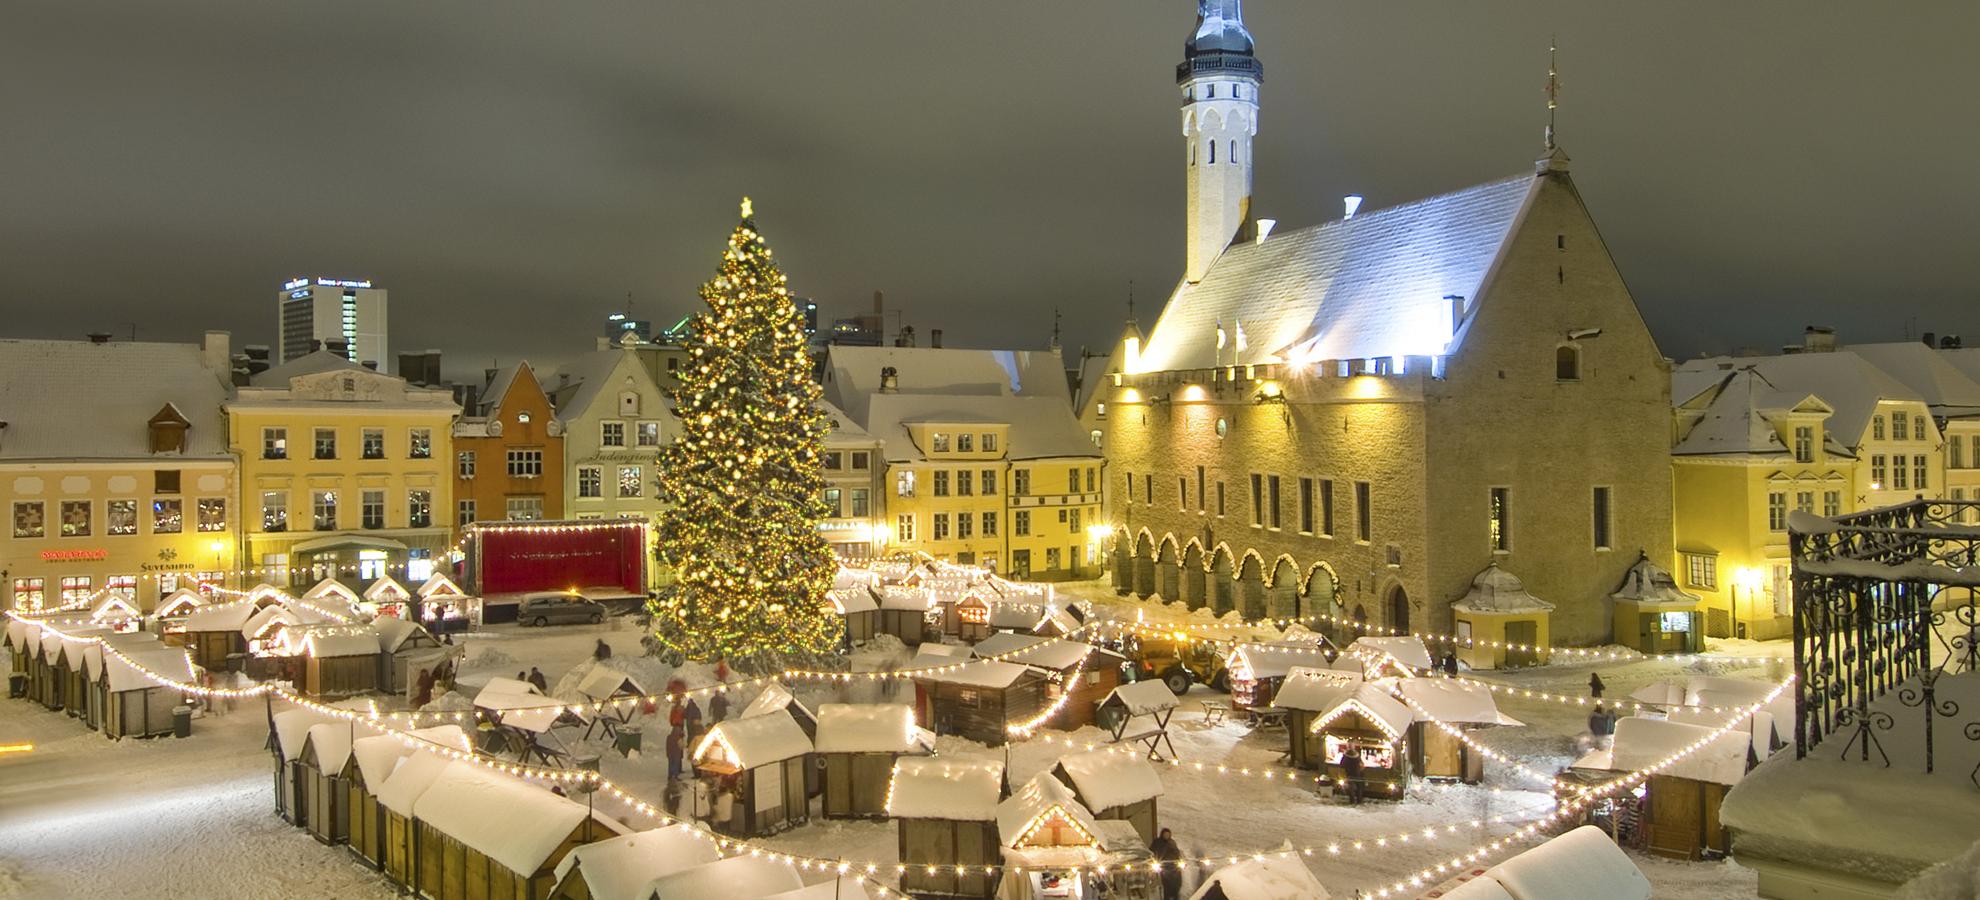 Christmas Market at Town Hall Square